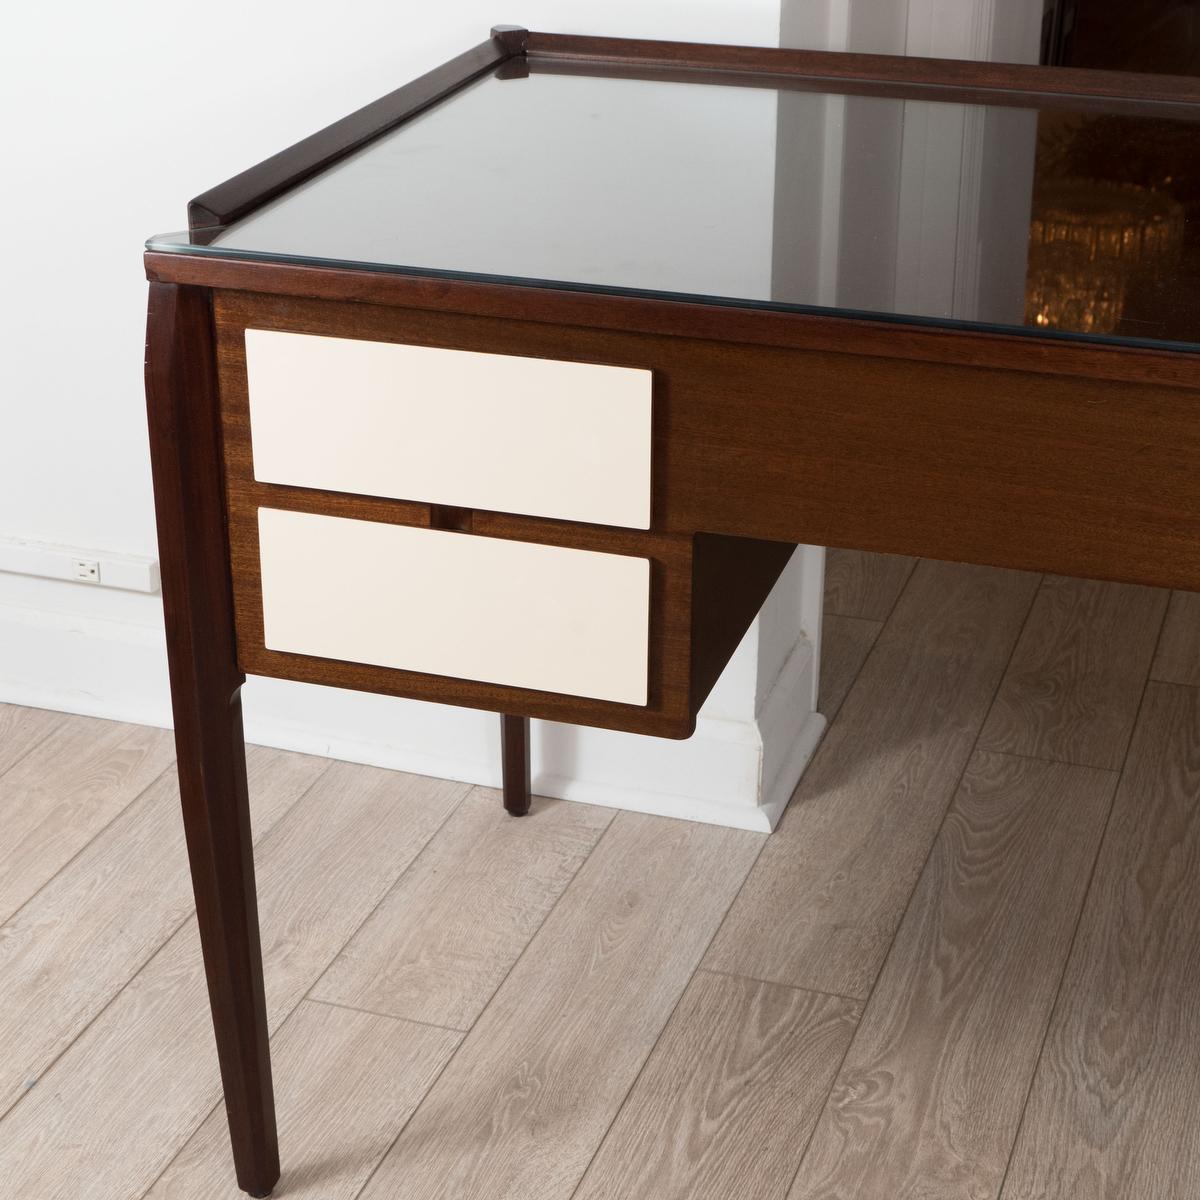 Four drawer wood desk with ivory lacquered drawers and angular legs in the style of Gio Ponti.